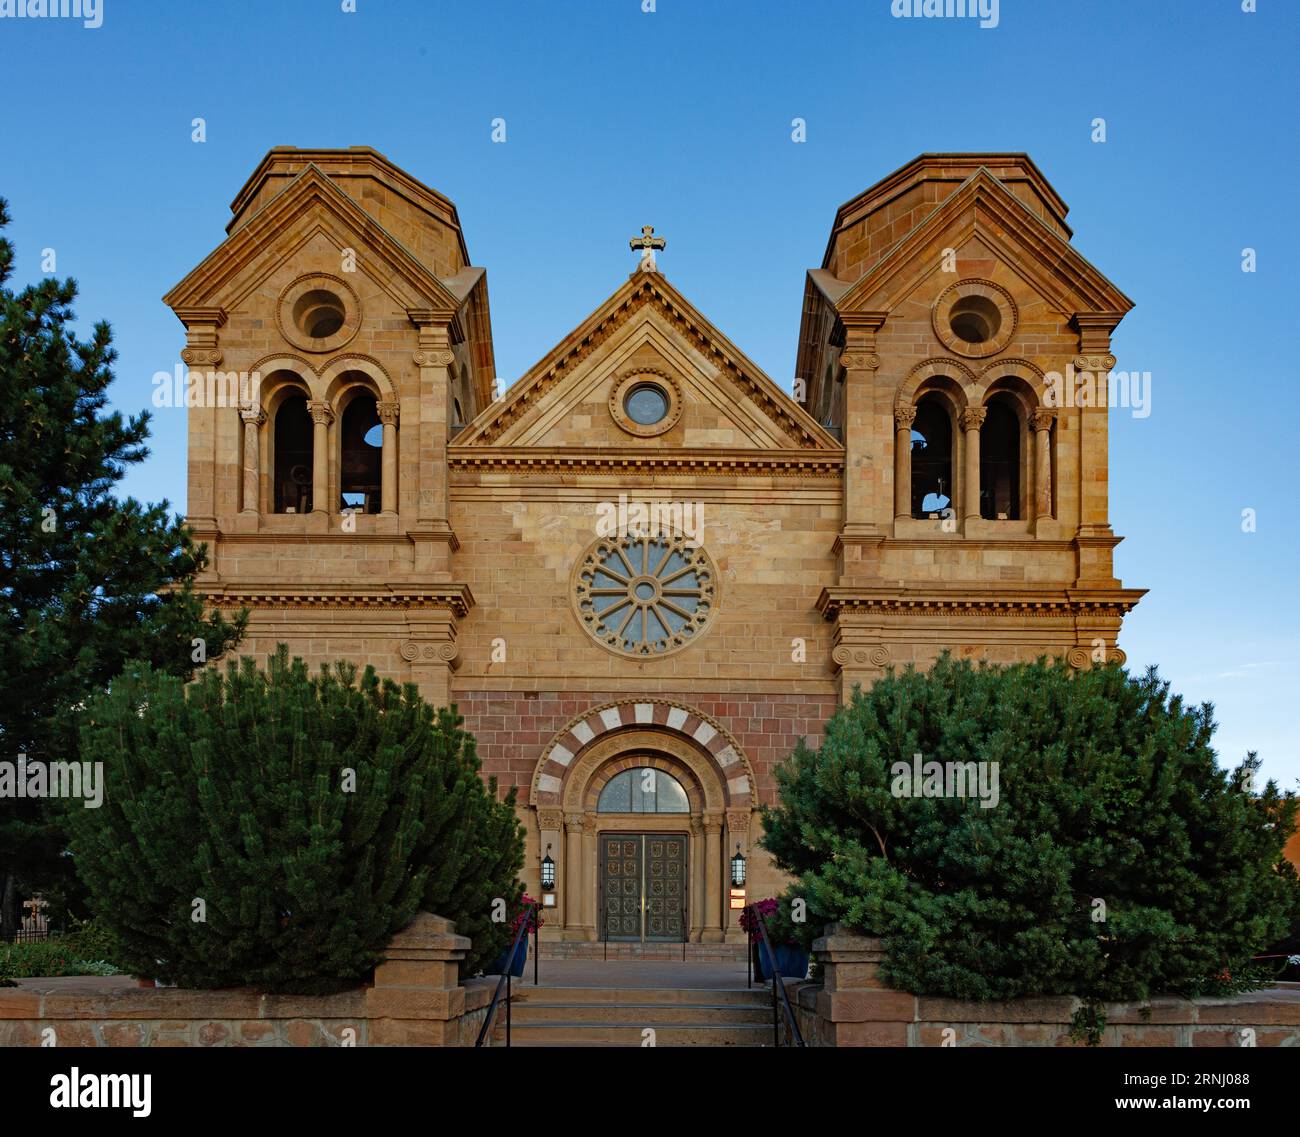 The Catholic Catherdral Basilica of Saint Francis of Assisis was built by Archbishop Juan Baptiste Lamy in 1869 - Santa Fe, New Mexico Stock Photo